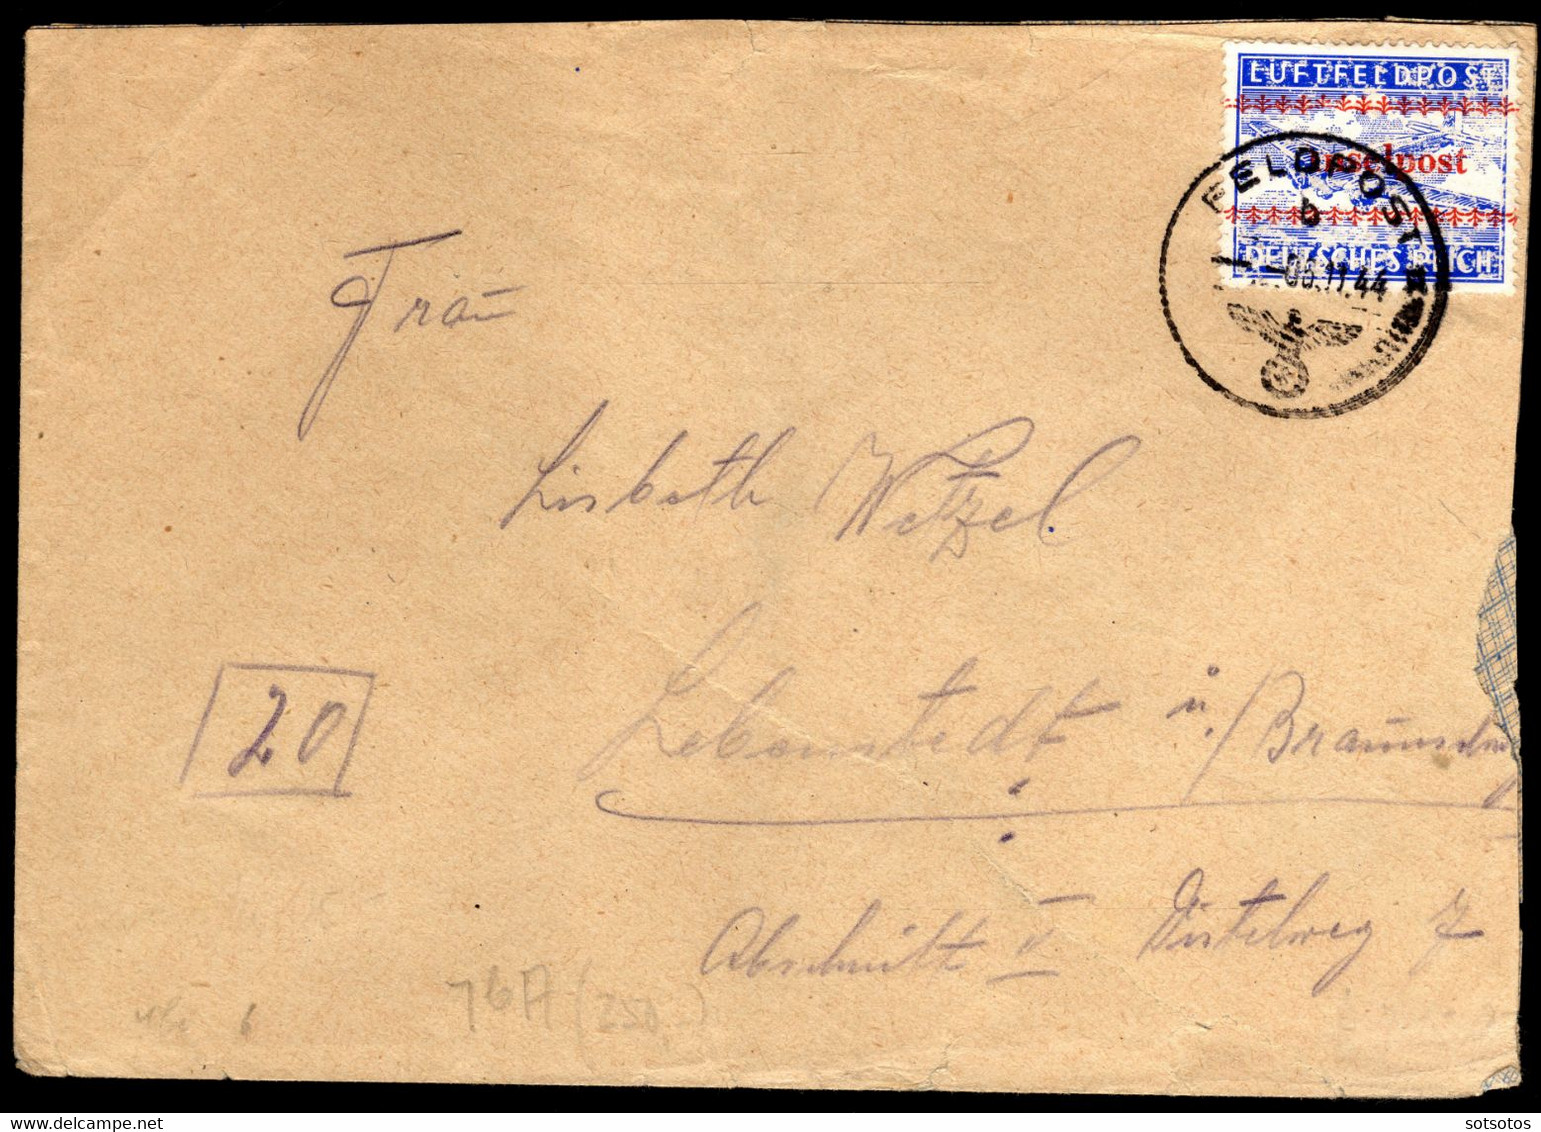 CRETE 5.11.1944: GERMAN OCCUPATION Surcharged INSELPOST German Air Post Stamp On Cover (M #7 - Hellas #1)  Extremely Rar - Creta